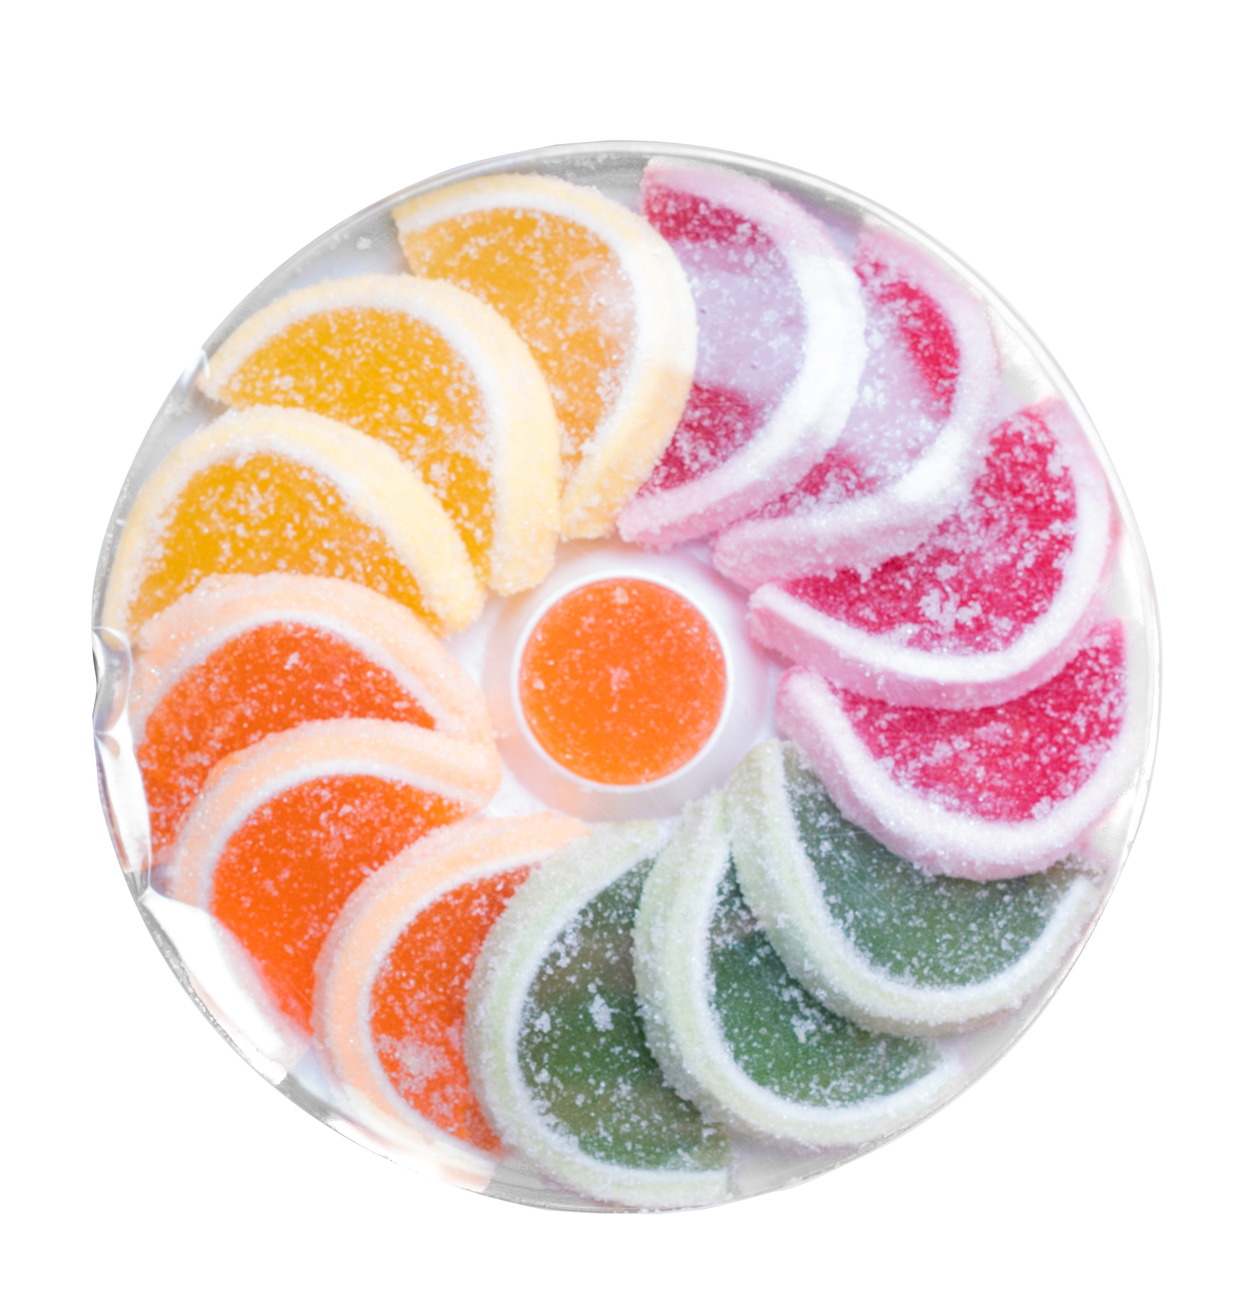 Makarena jelly slices Woogie (12 x 200g)